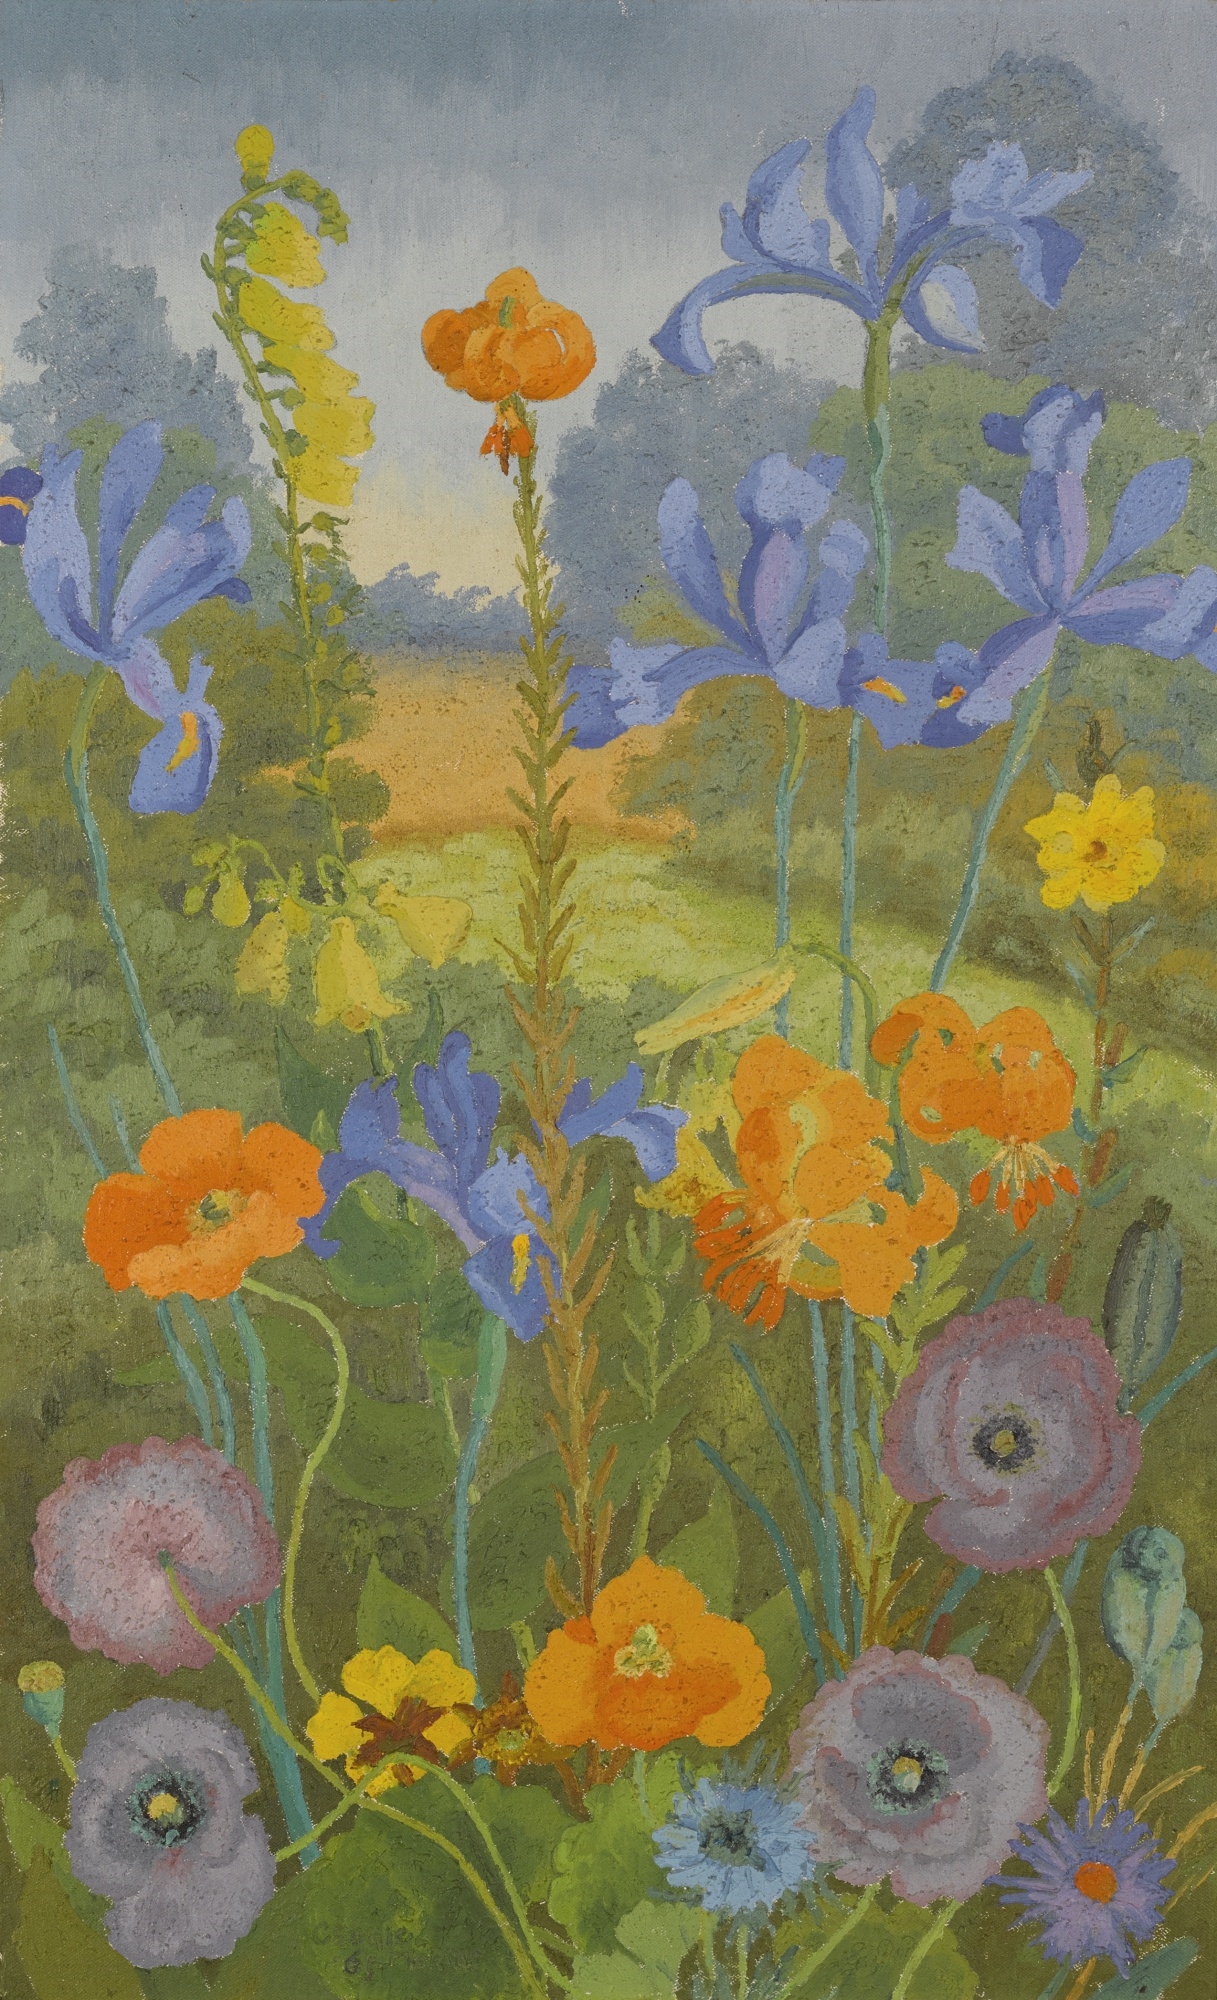 POPPIES, CORNFLOWERS, SNAP-DRAGONS, IRISES AND LILIES by Sir Cedric Morris, 1965